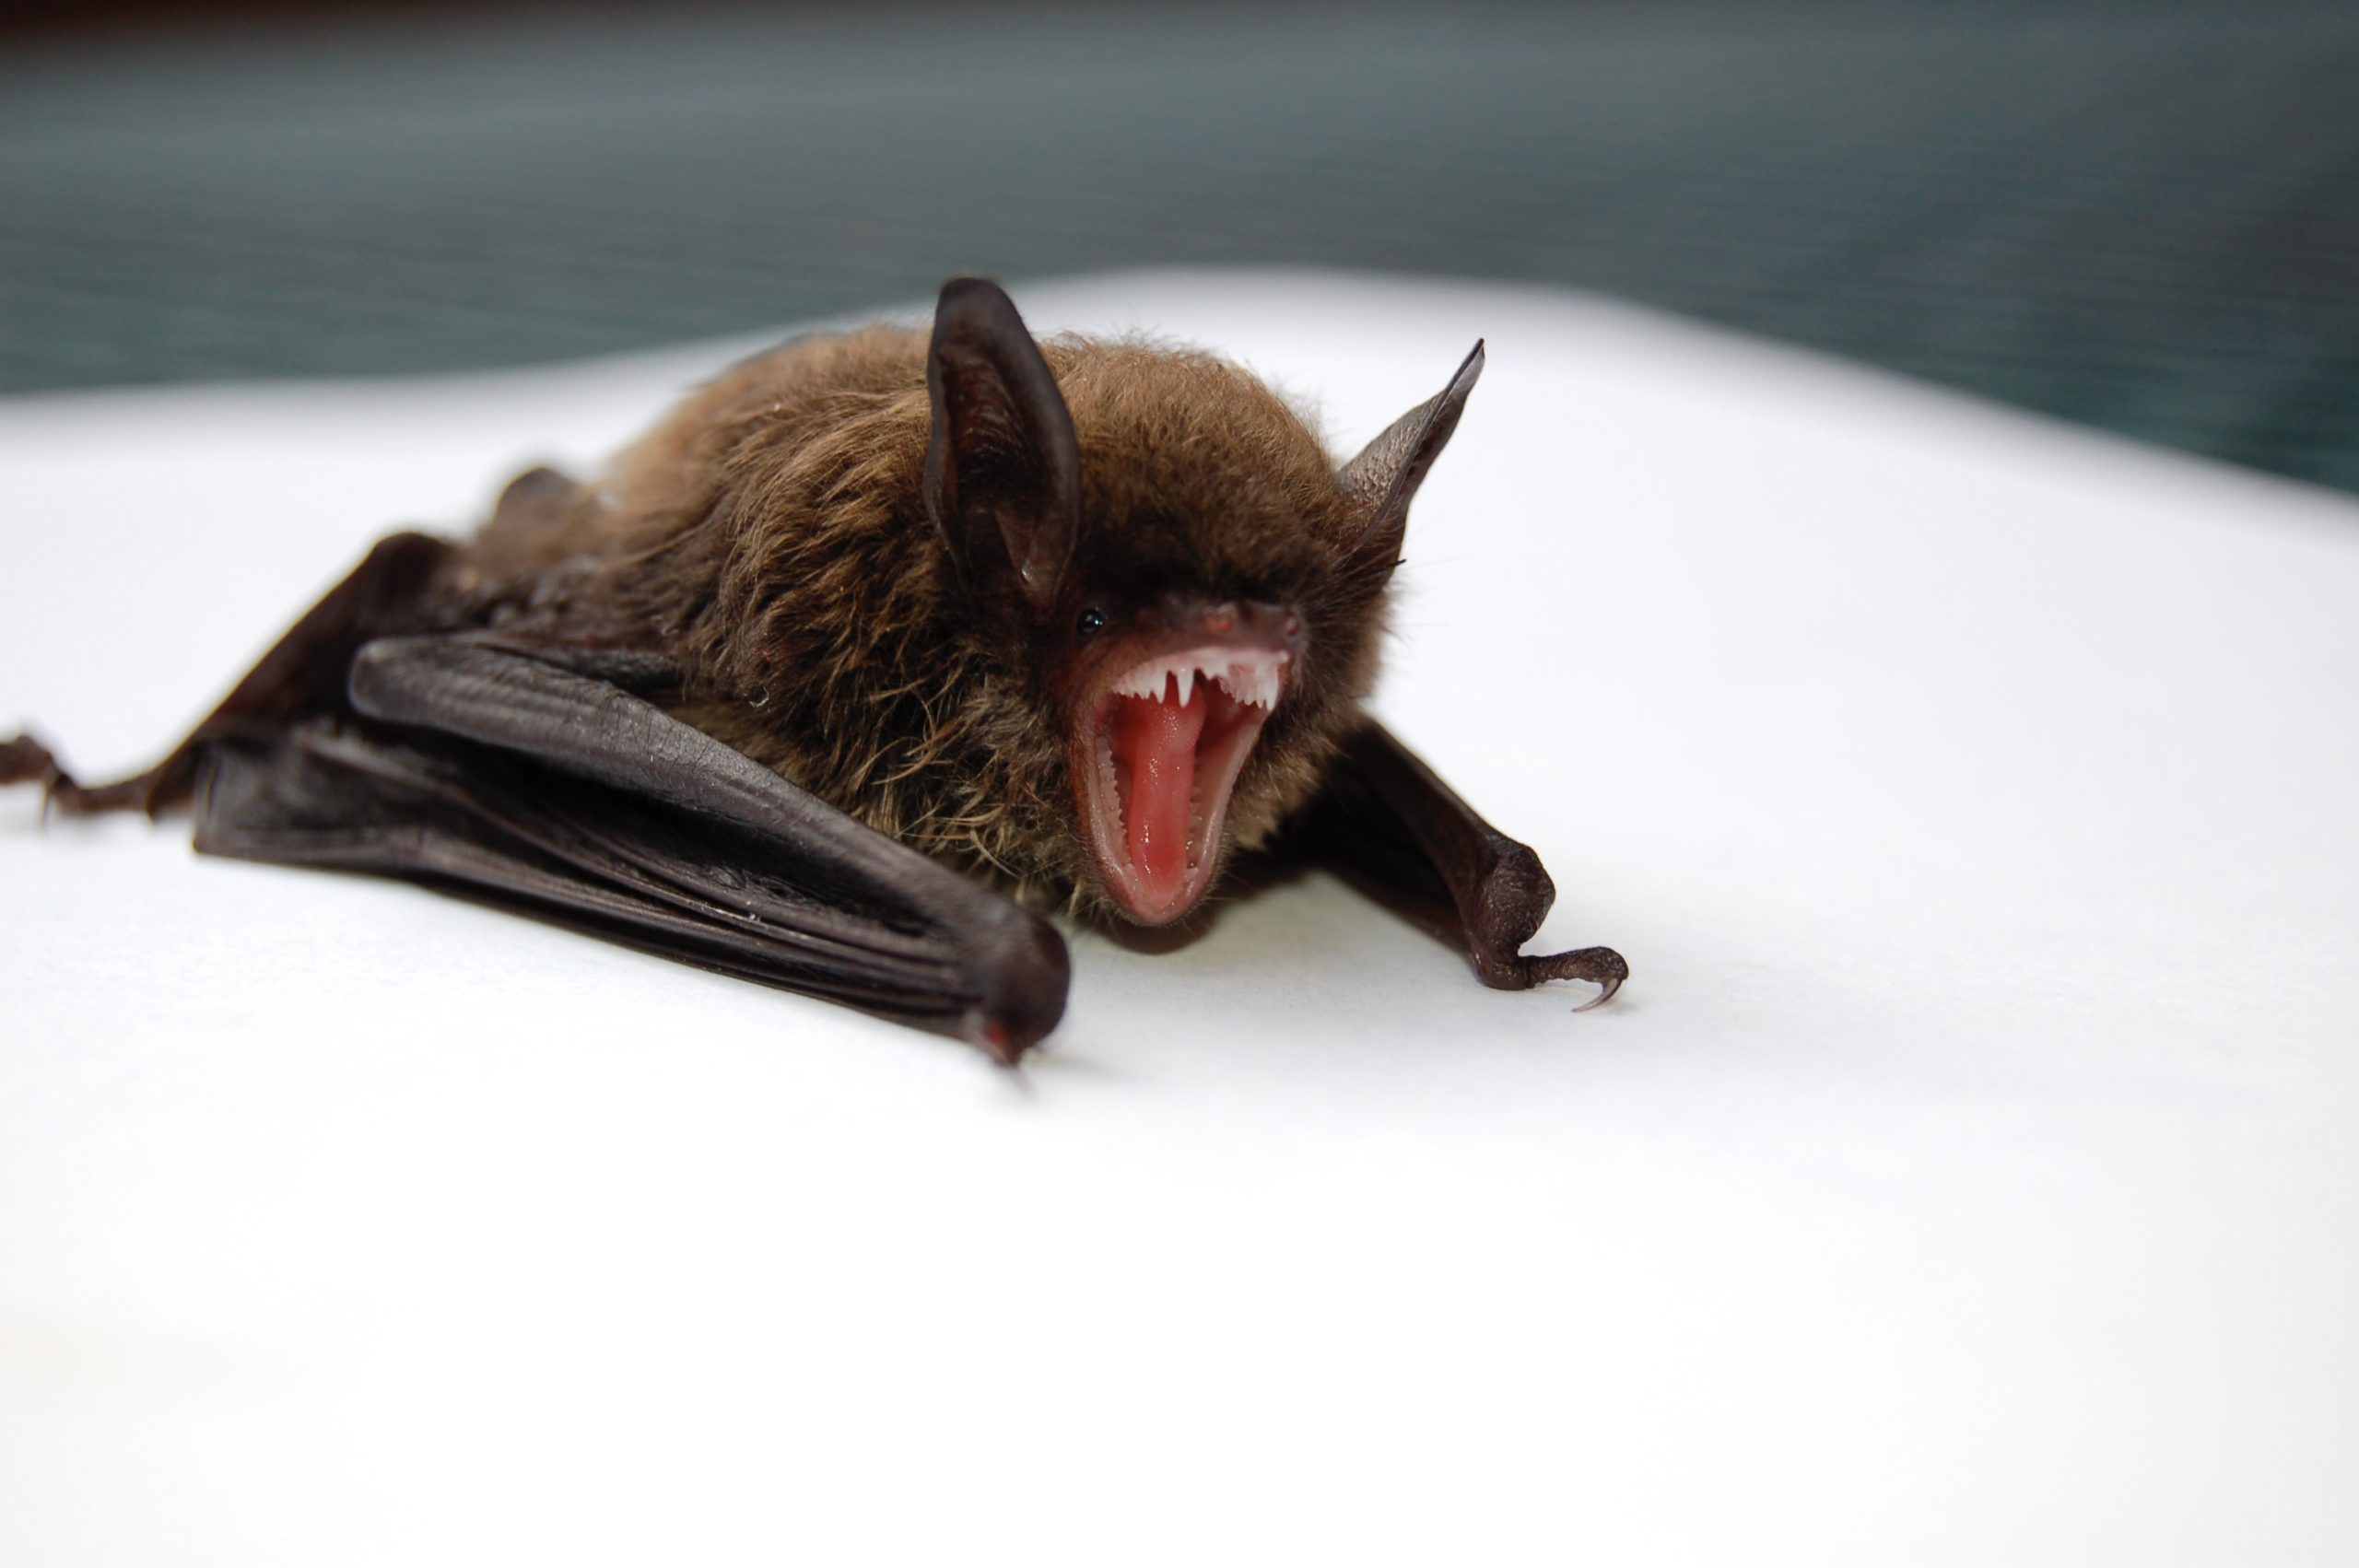 Many Bats and vampire pictures Todd-cravens-IY1sRDxNWN4-unsplash-scaled